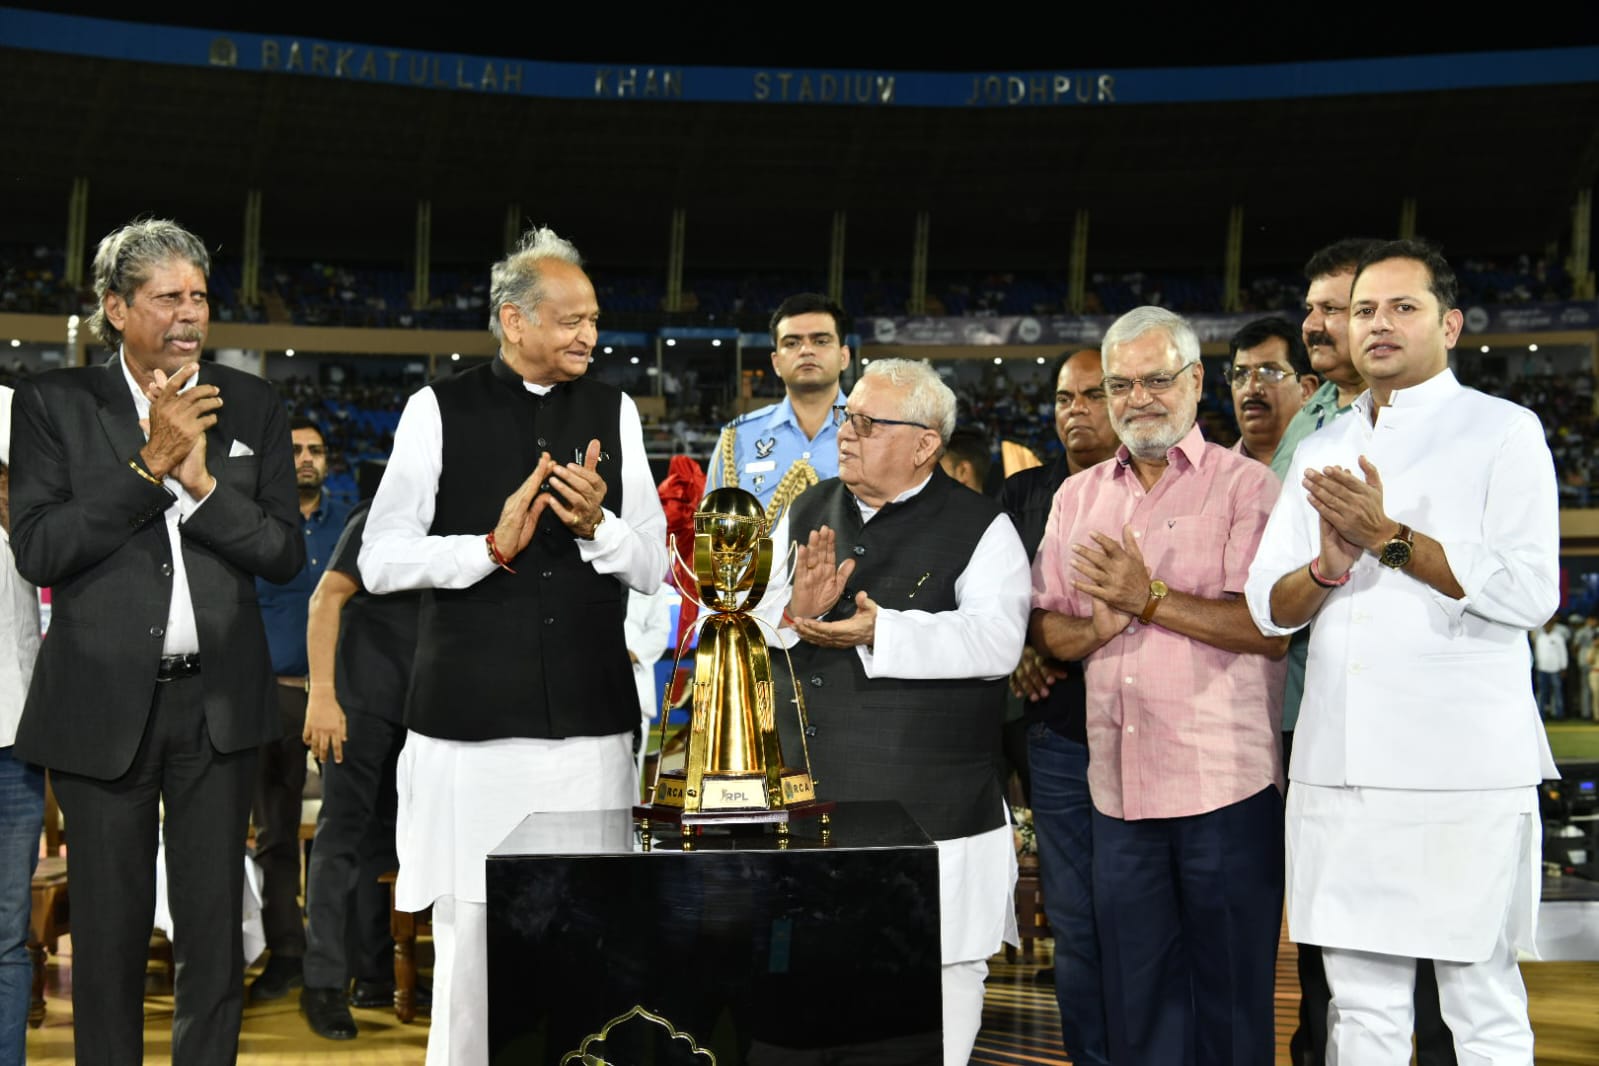 Hon'ble Governor has inaugurated The Rajasthan Premier League, organized by the Rajasthan Cricket Association